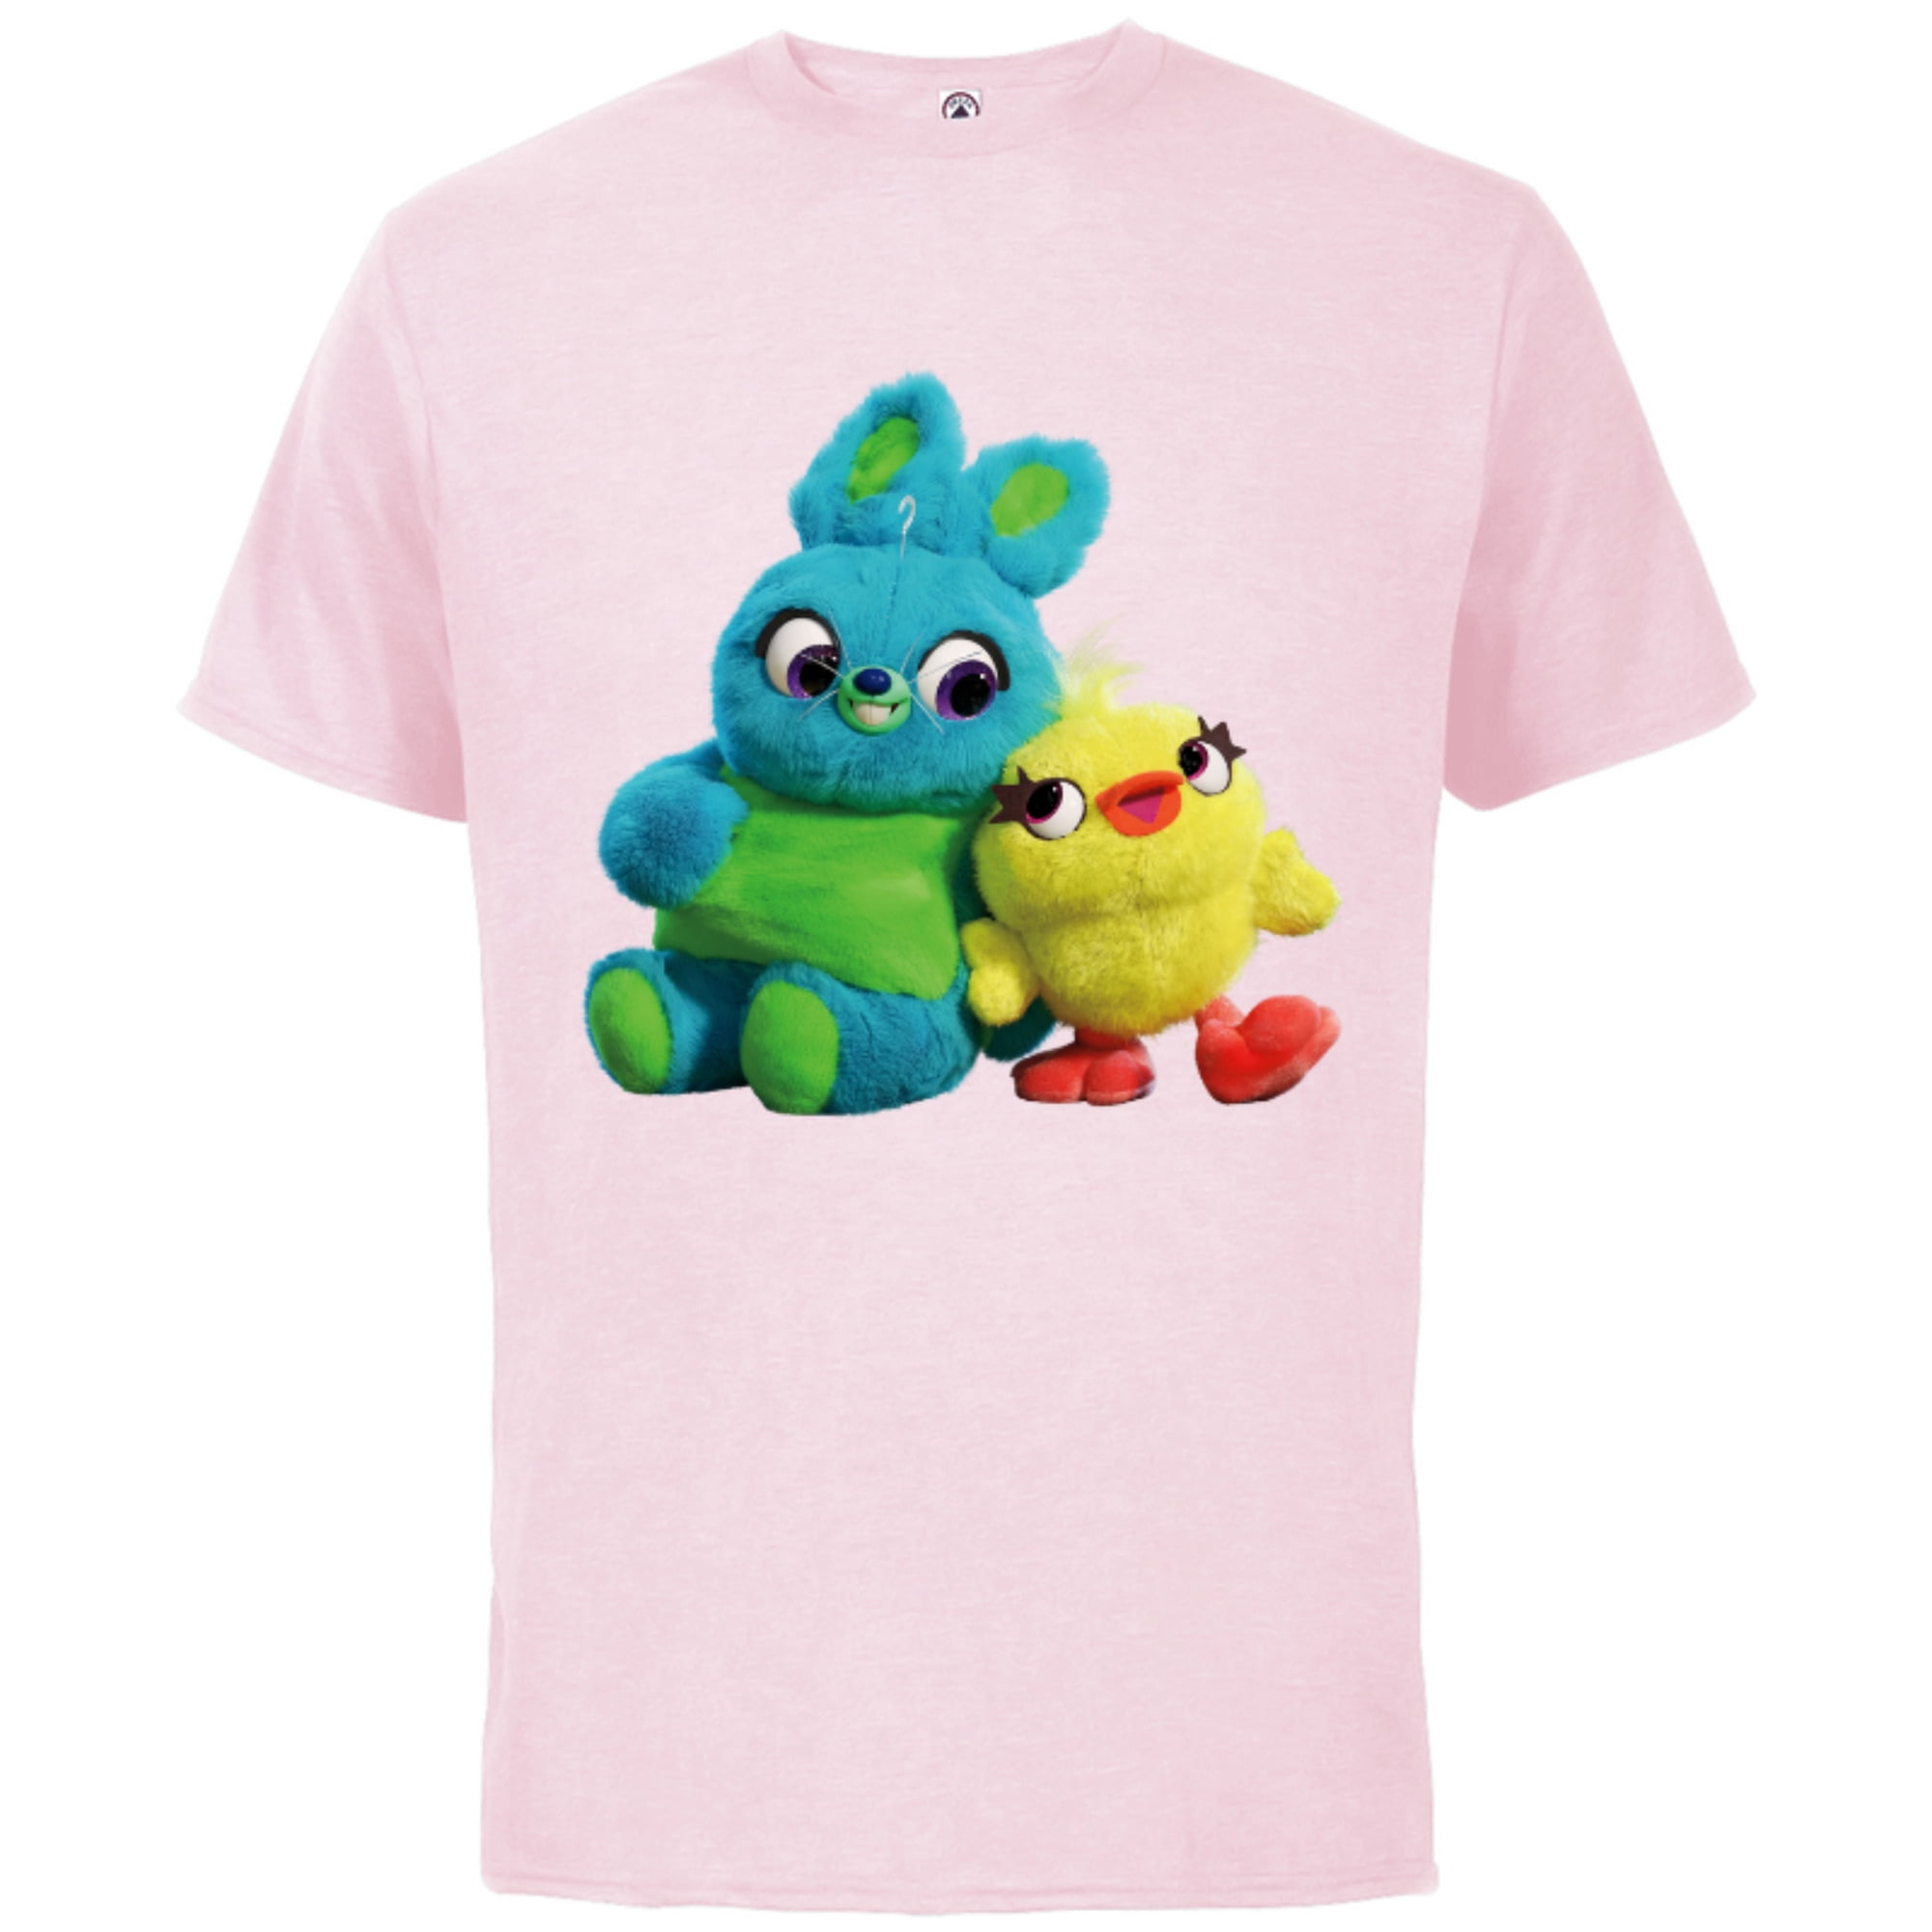 - Adults Bunny Pixar 4 Pals and T-Shirt T-Shirt Disney Cotton Story Toy - Plush Short Sleeve for Ducky Customized-Putty